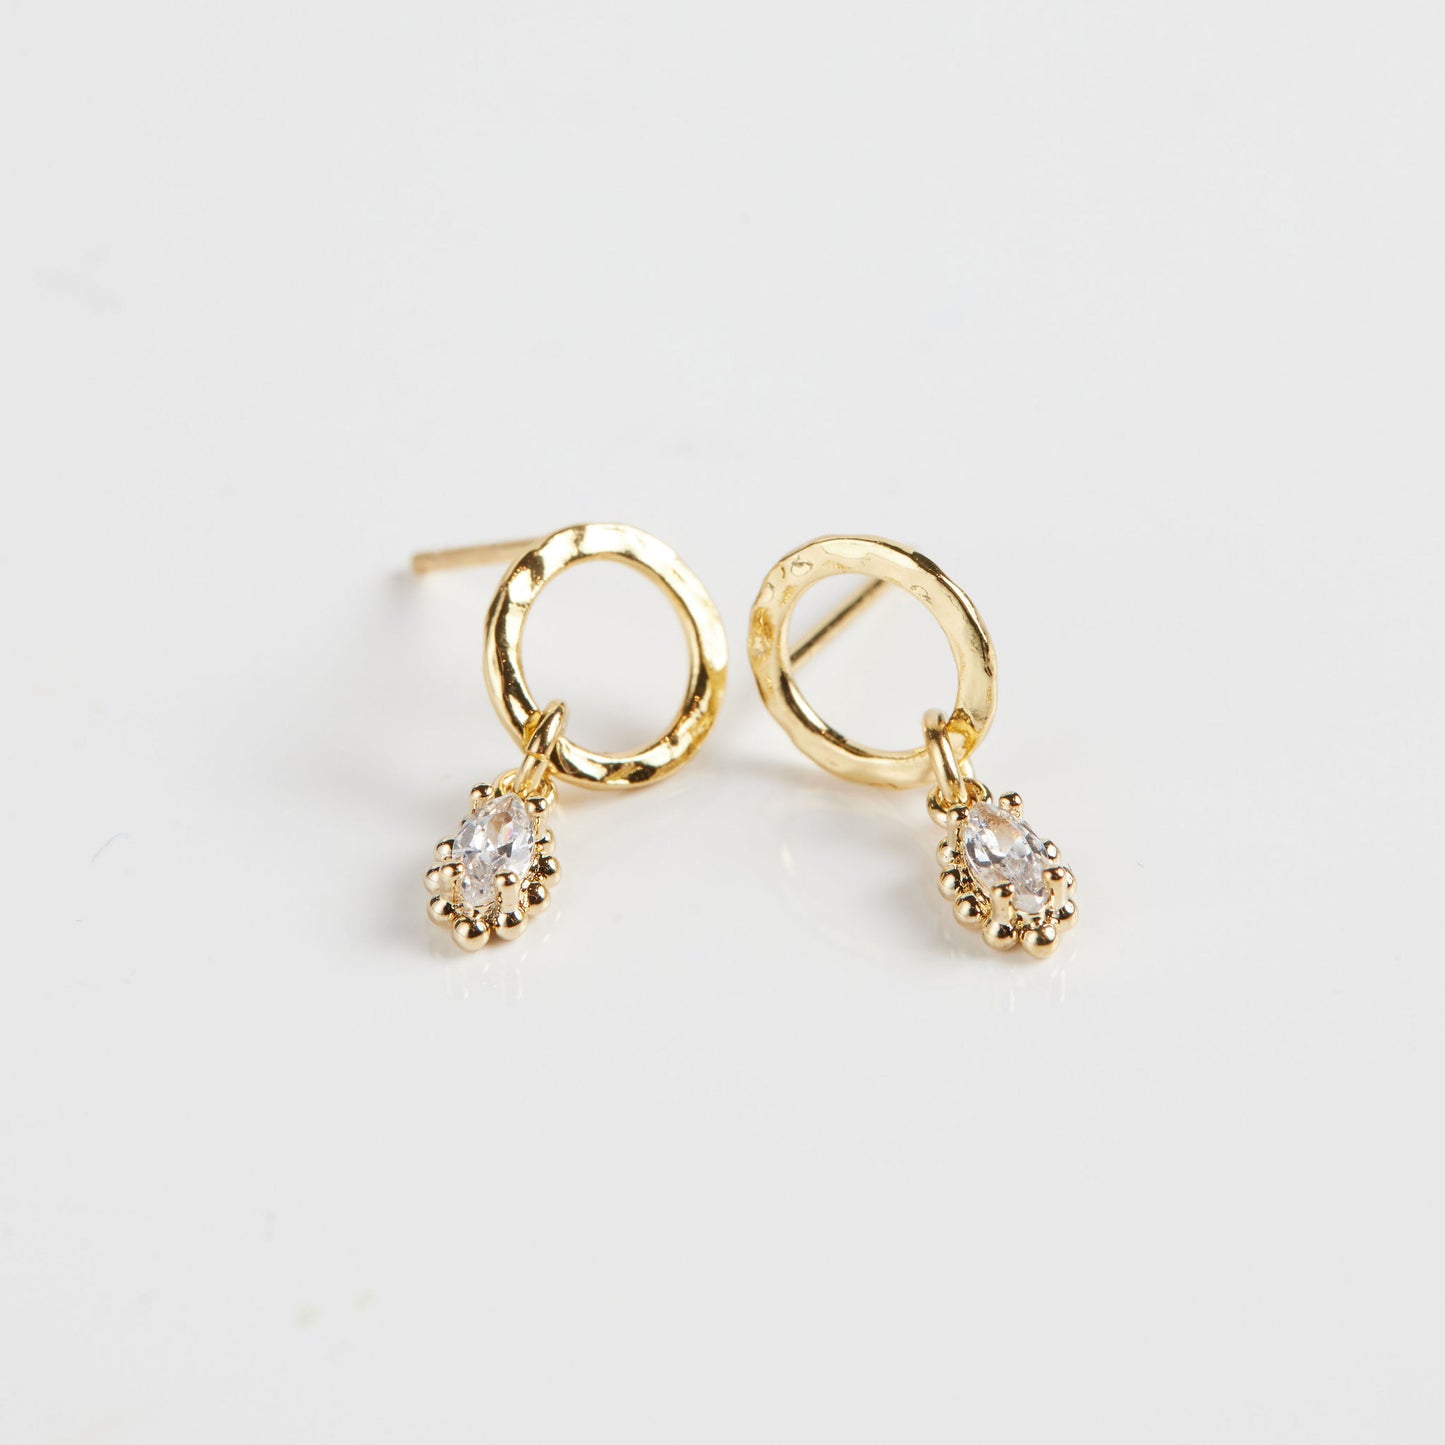 Marquise drop earrings on white background